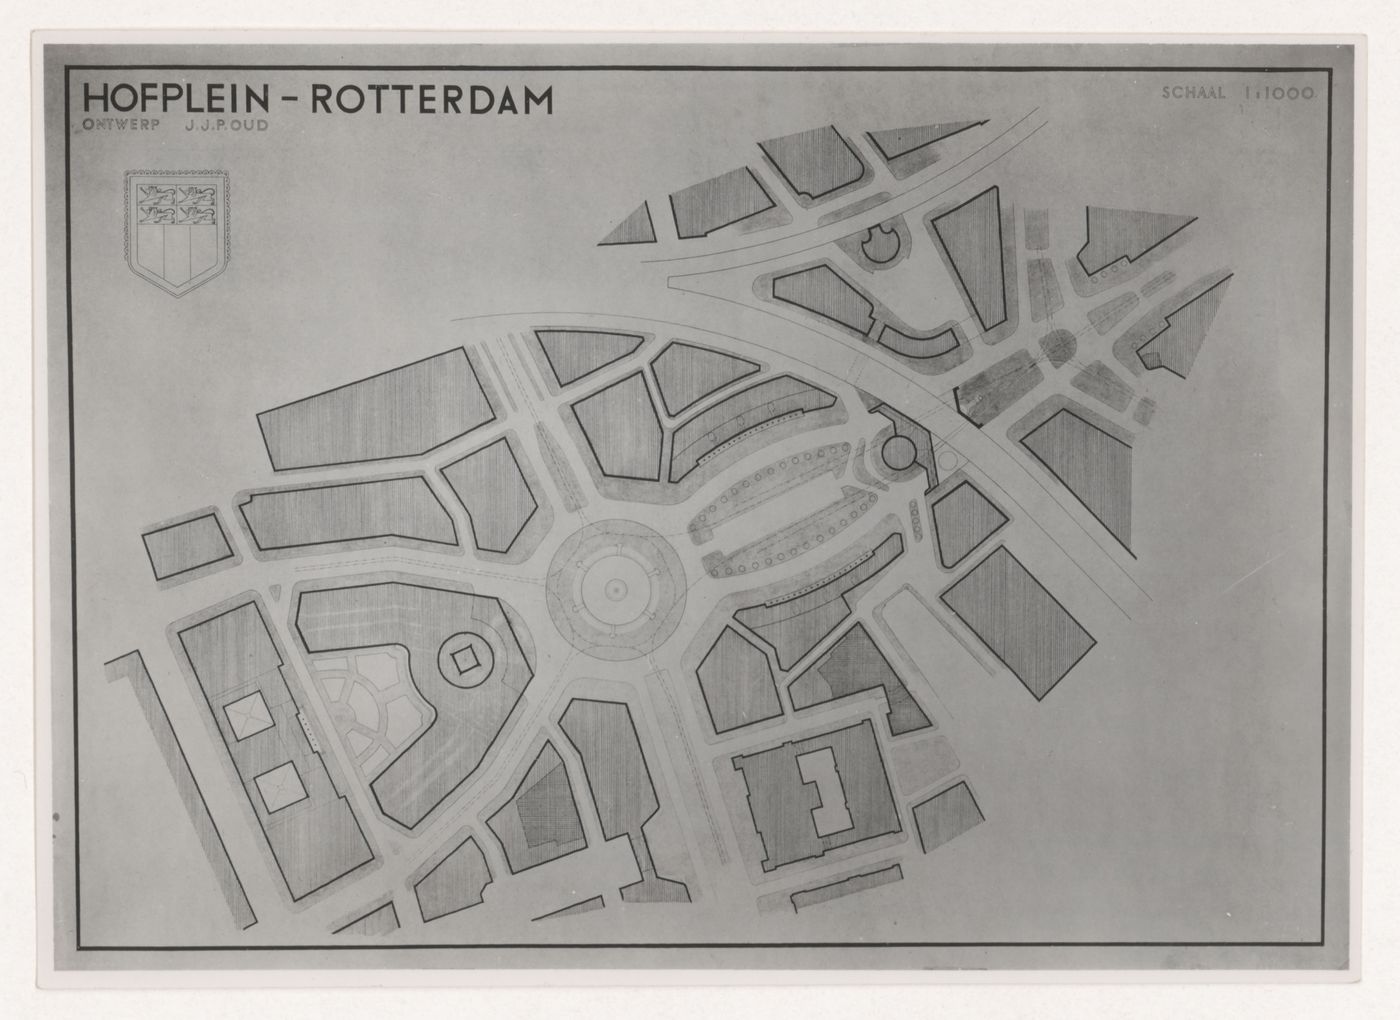 Photograph of a site plan for the reconstruction of the Hofplein (city centre), Rotterdam, Netherlands